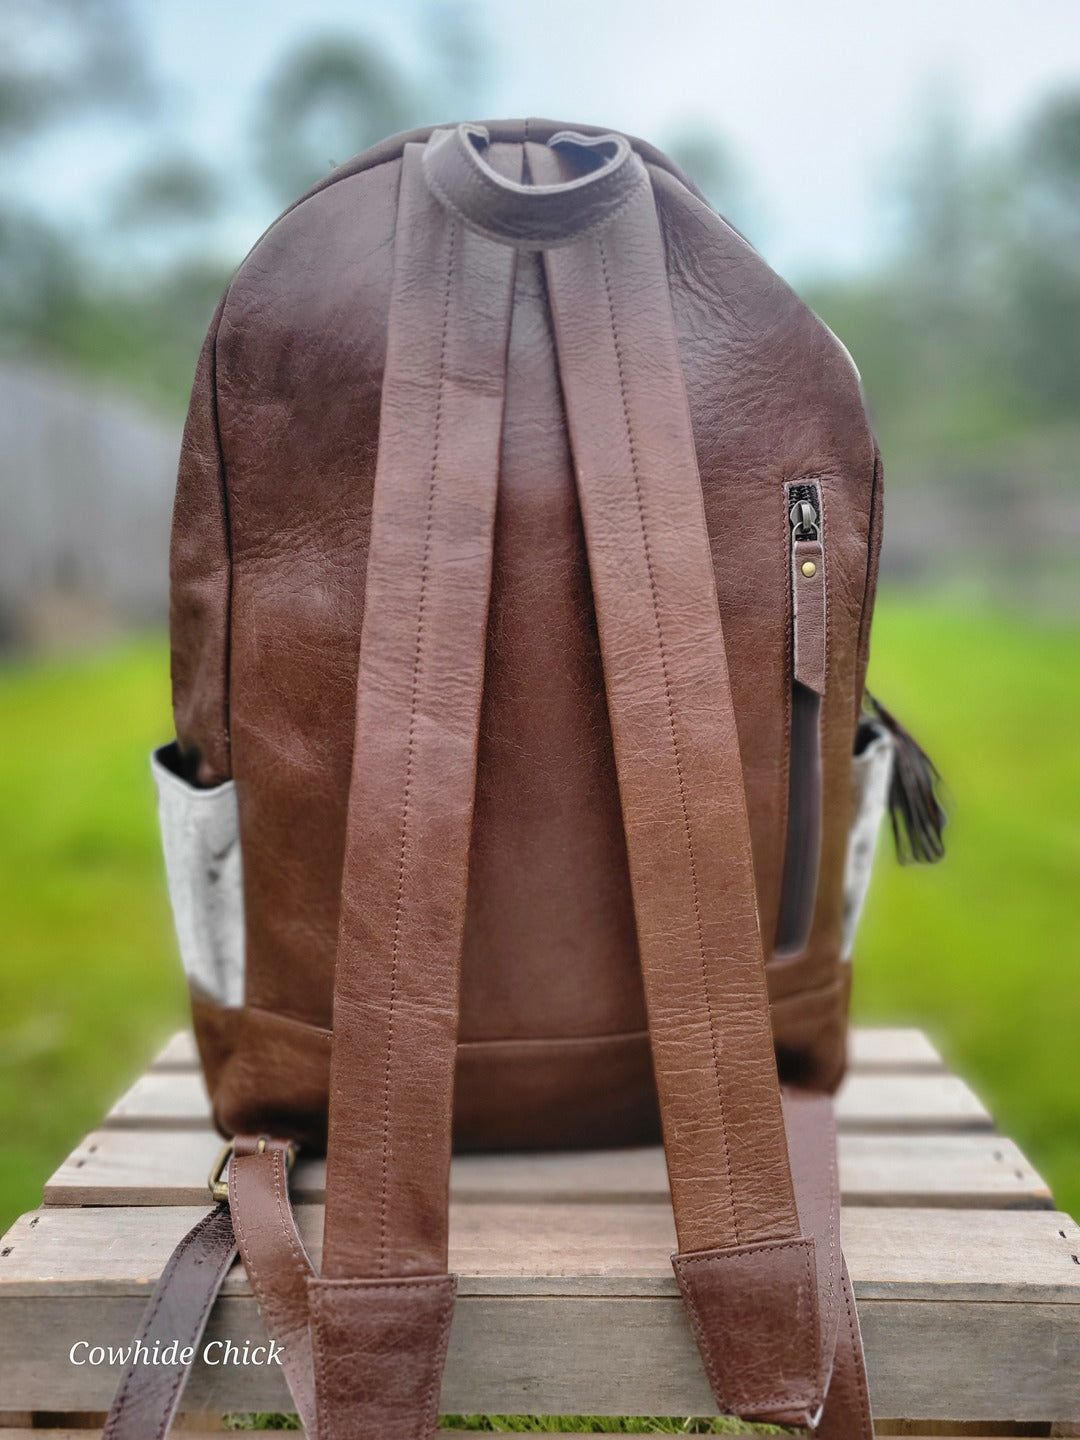 cowhide backpack - Tan with sunflower